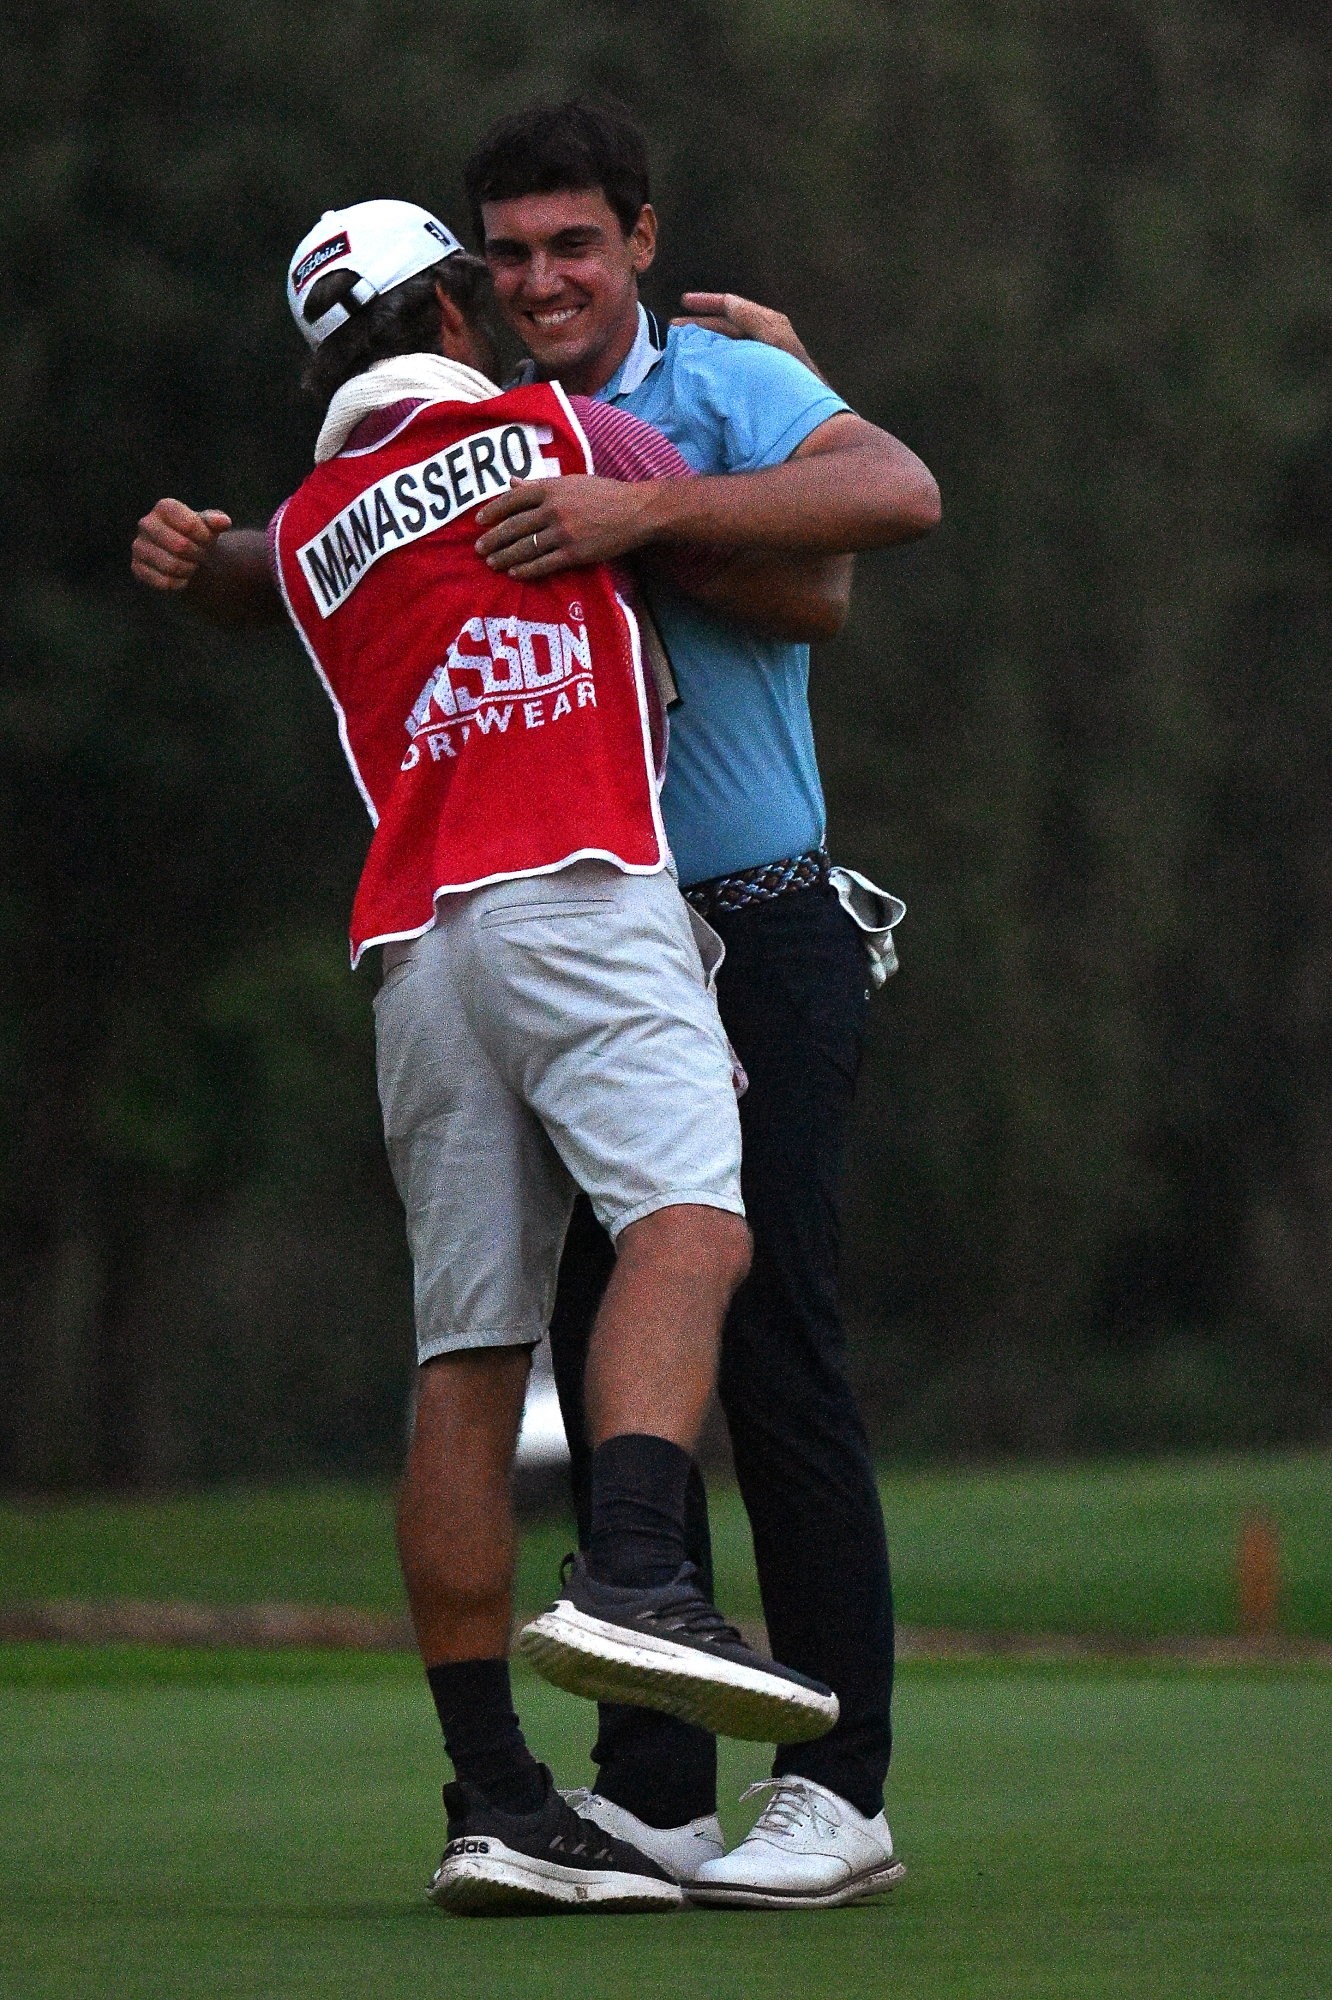 JOHANNESBURG, SOUTH AFRICA - MARCH 10: Matteo Manassero of Italy celebrates victory with his caddie on the 18th green during day four of the Jonsson Workwear Open at Glendower Golf Club on March 10, 2024 in Johannesburg, South Africa. (Photo by Stuart Franklin/Getty Images)